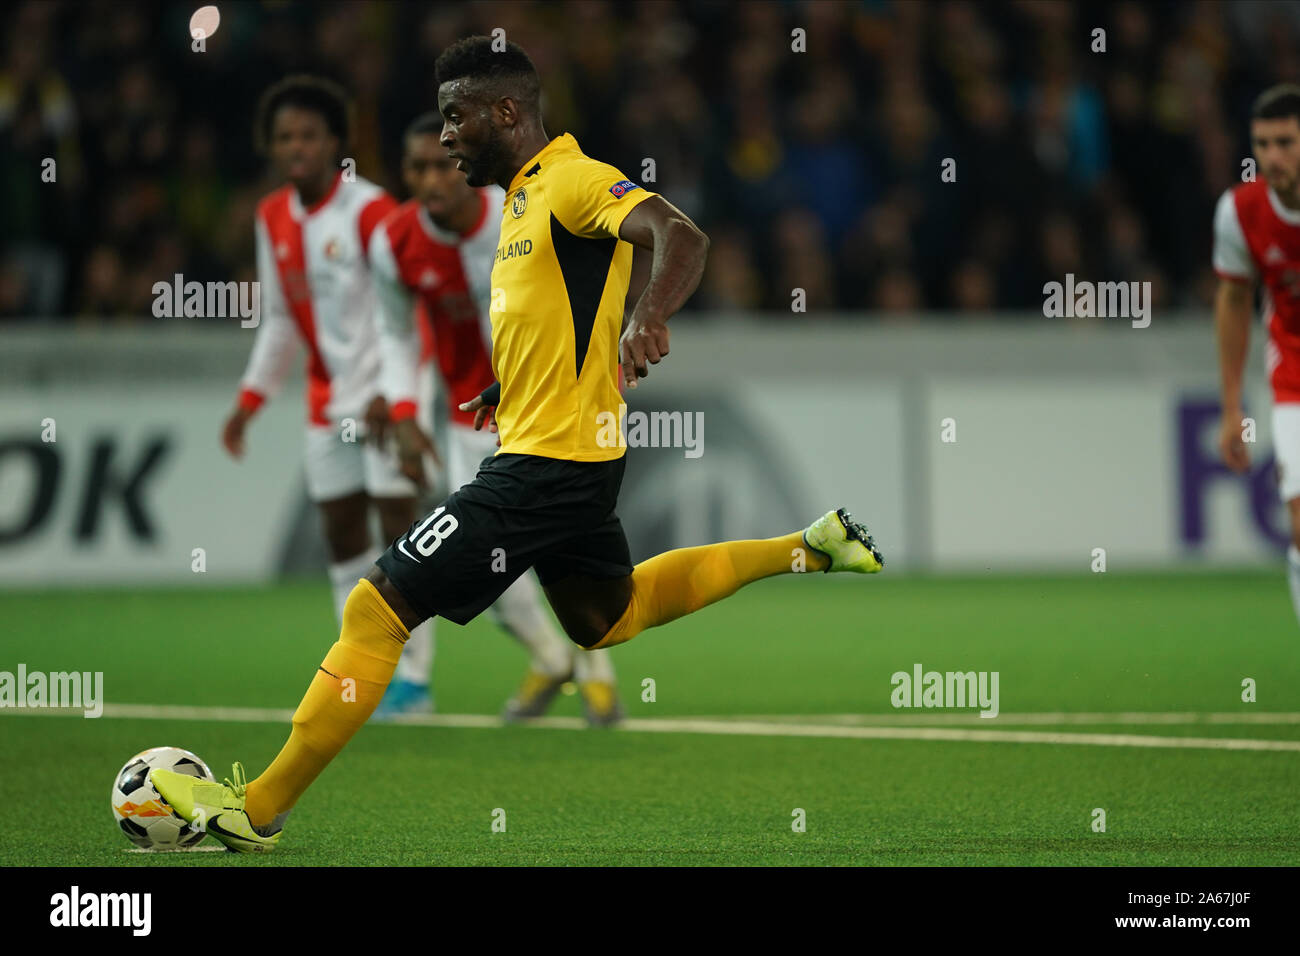 BERNE, SWITZERLAND - OCTOBER 24: Jean Pierre Nsamé of BSC Young Boys scores from the penalty spot during the Europa League Group G Stage football match between BSC Young Boys and Feyenoord Rotterdam at Stade de Suisse on October 24, 2019 in Berne, Switzerland (Photo by Daniela Porcelli/SPP) Stock Photo